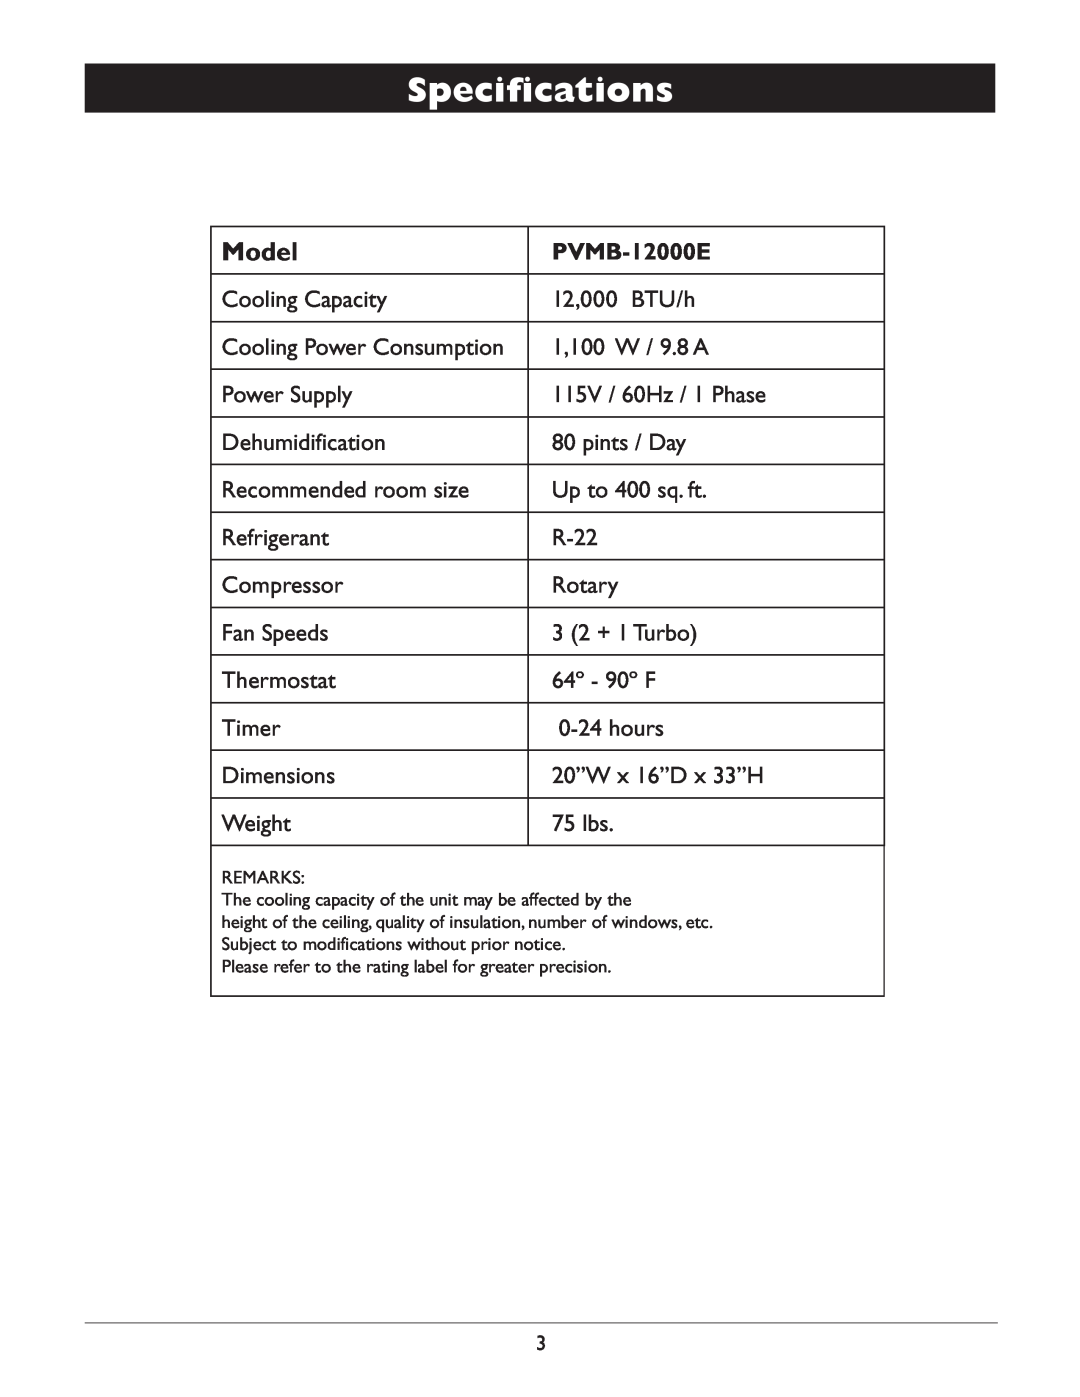 Amcor PVMB-12000E owner manual Specifications, Model 